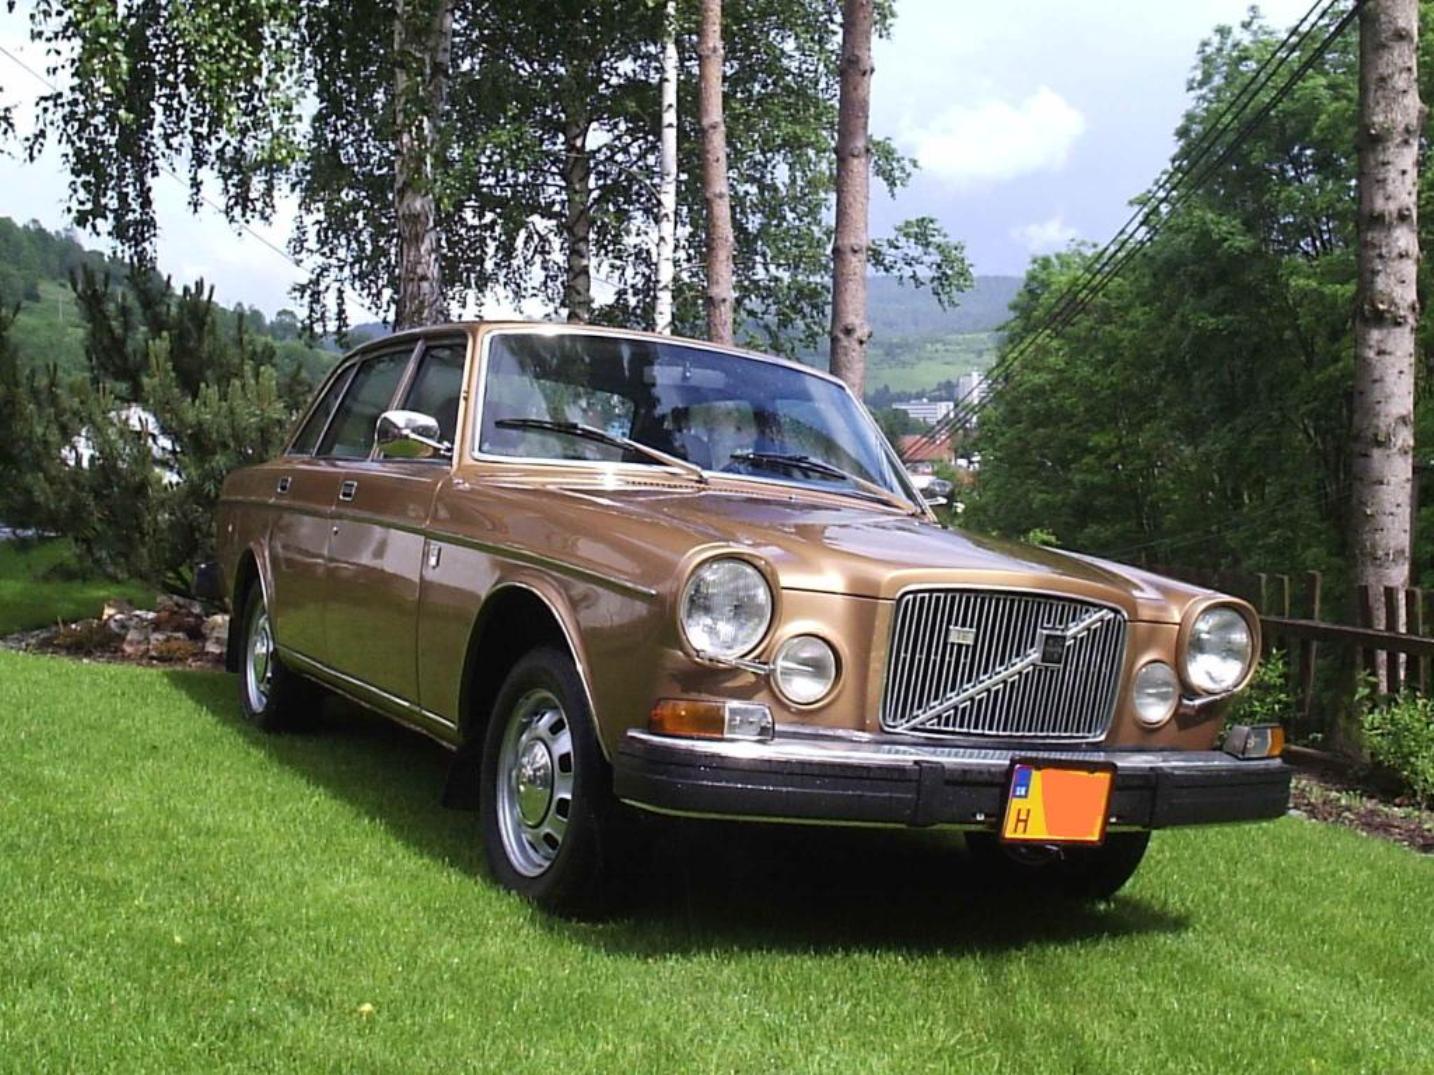 Volvo 164 TE 1974 gold Cz republic for sale | Flickr - Photo Sharing!